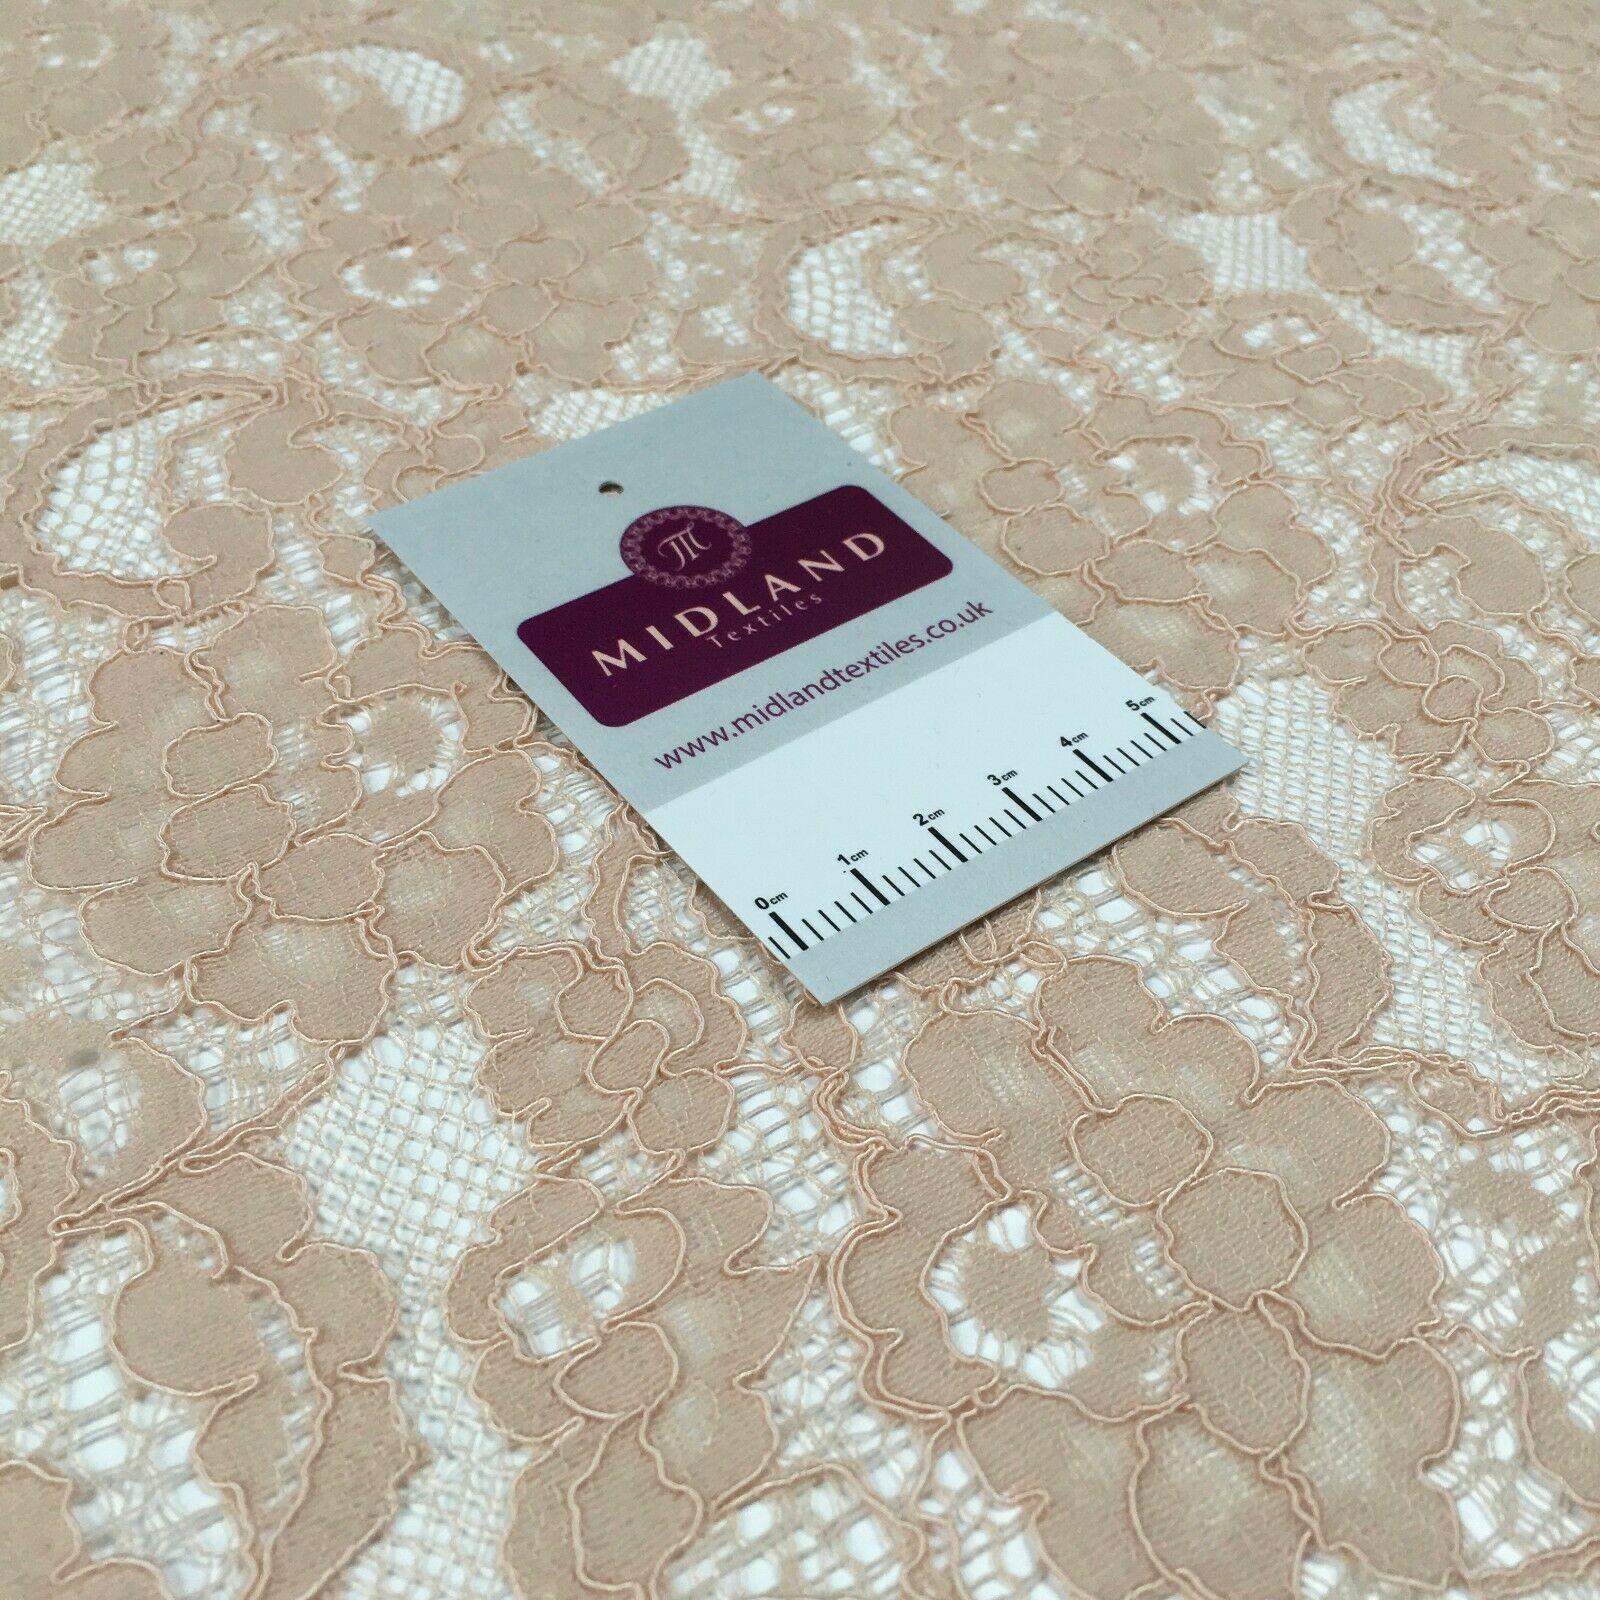 Skin Lace Corded floral dress Fabric 150 cm M186-53 Mtex